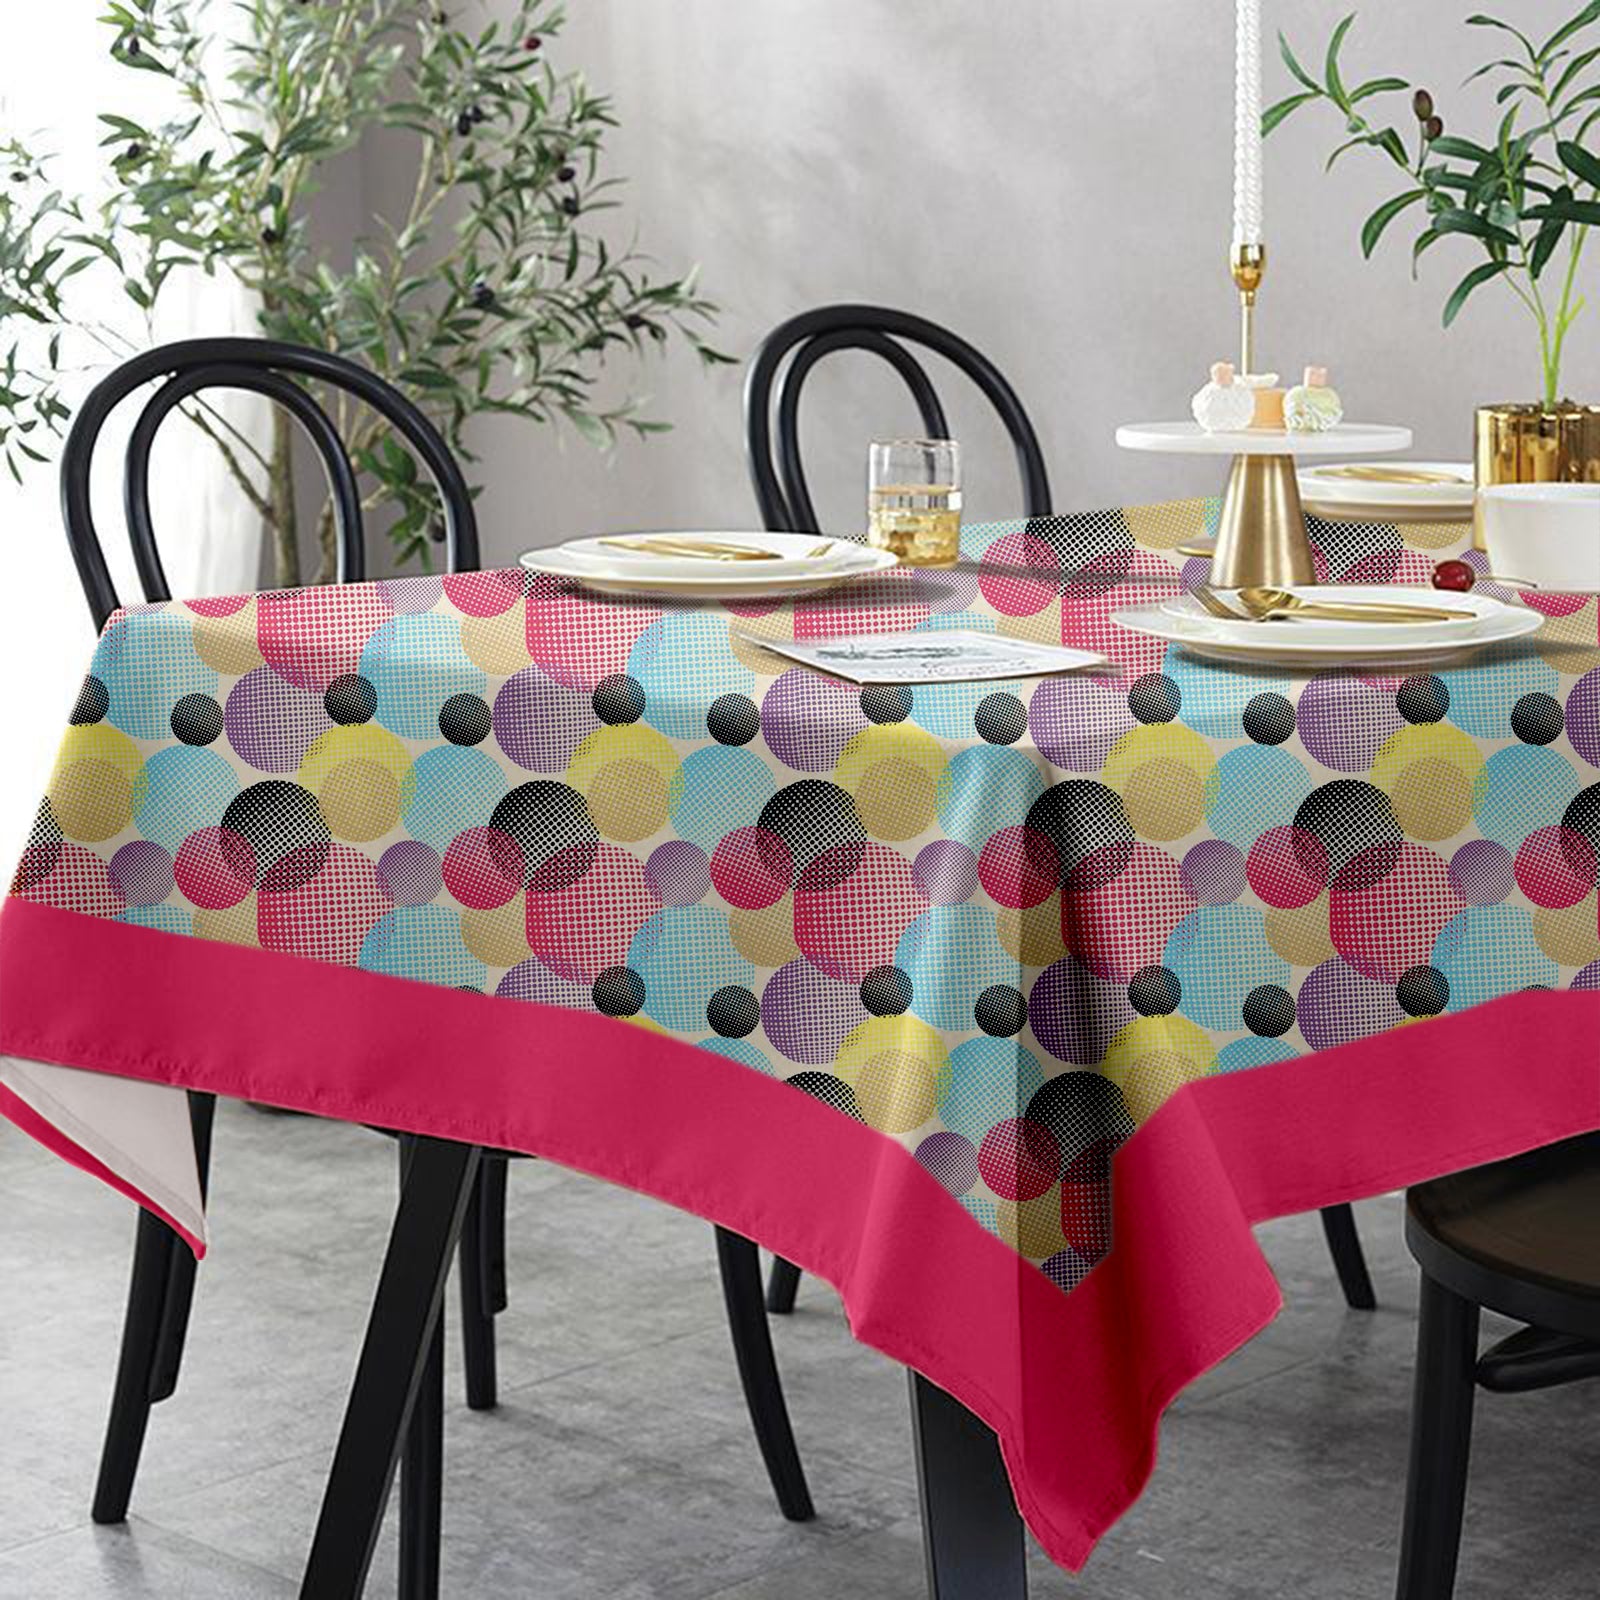 Lushomes 12 Seater Circles Printed Dining Table Cover Cloth Linen, table cloth, table cover, dinning table cover   (Size- 120 x 70 Inches, Single Pc )